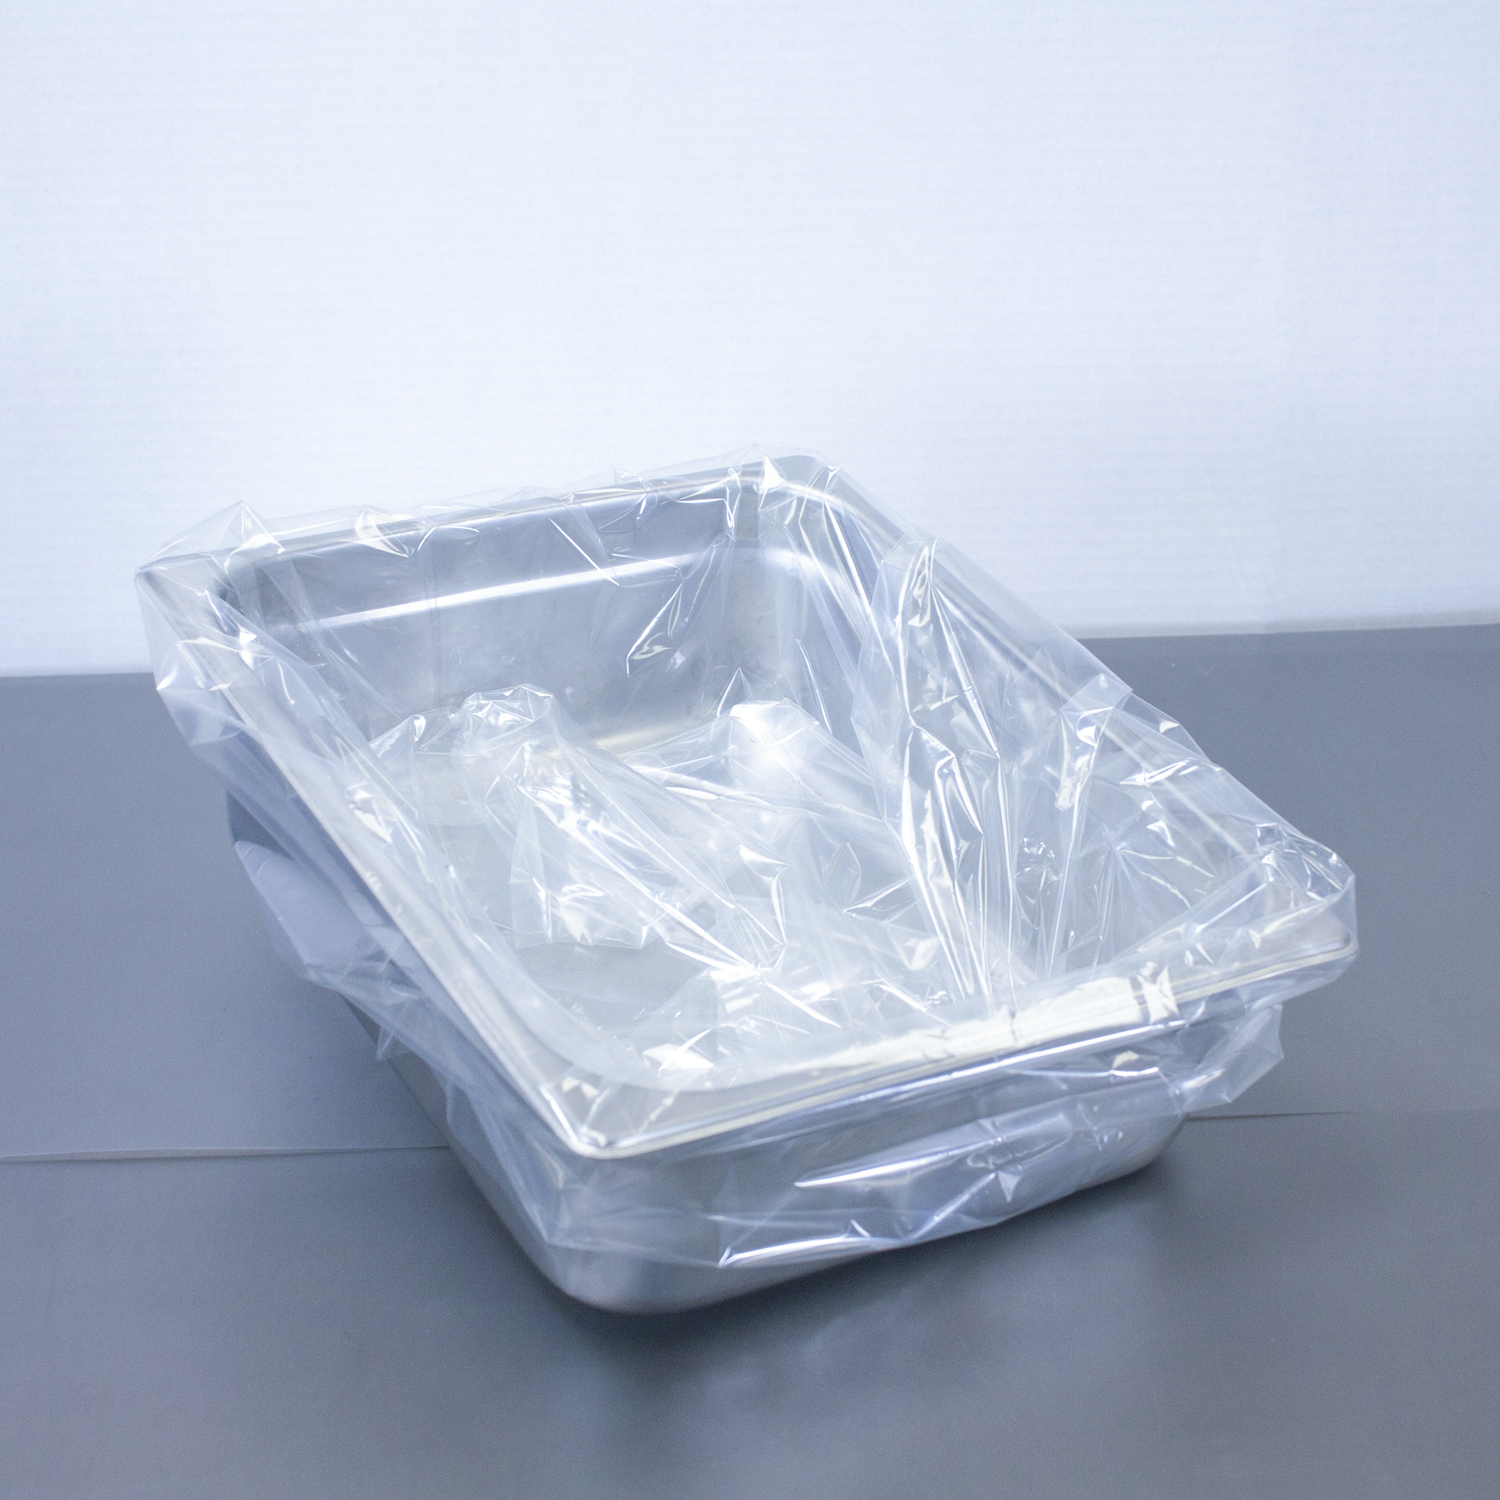 Plastic Oven Bags (24 x 30 - Other Sizes Available)